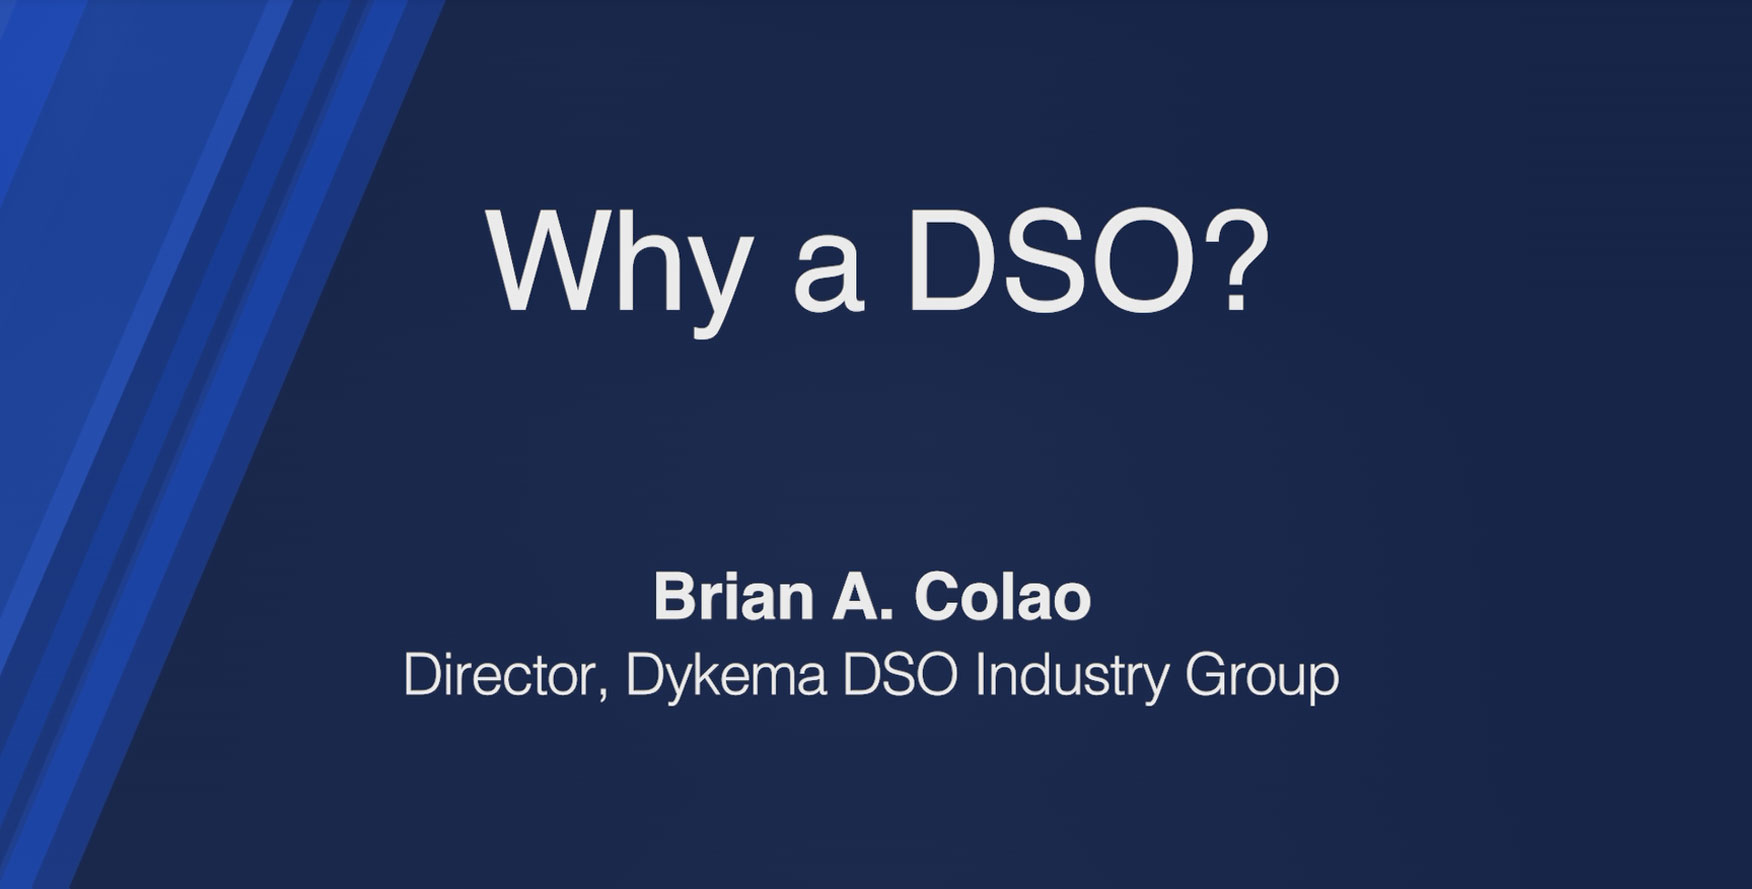 Why a DSO?